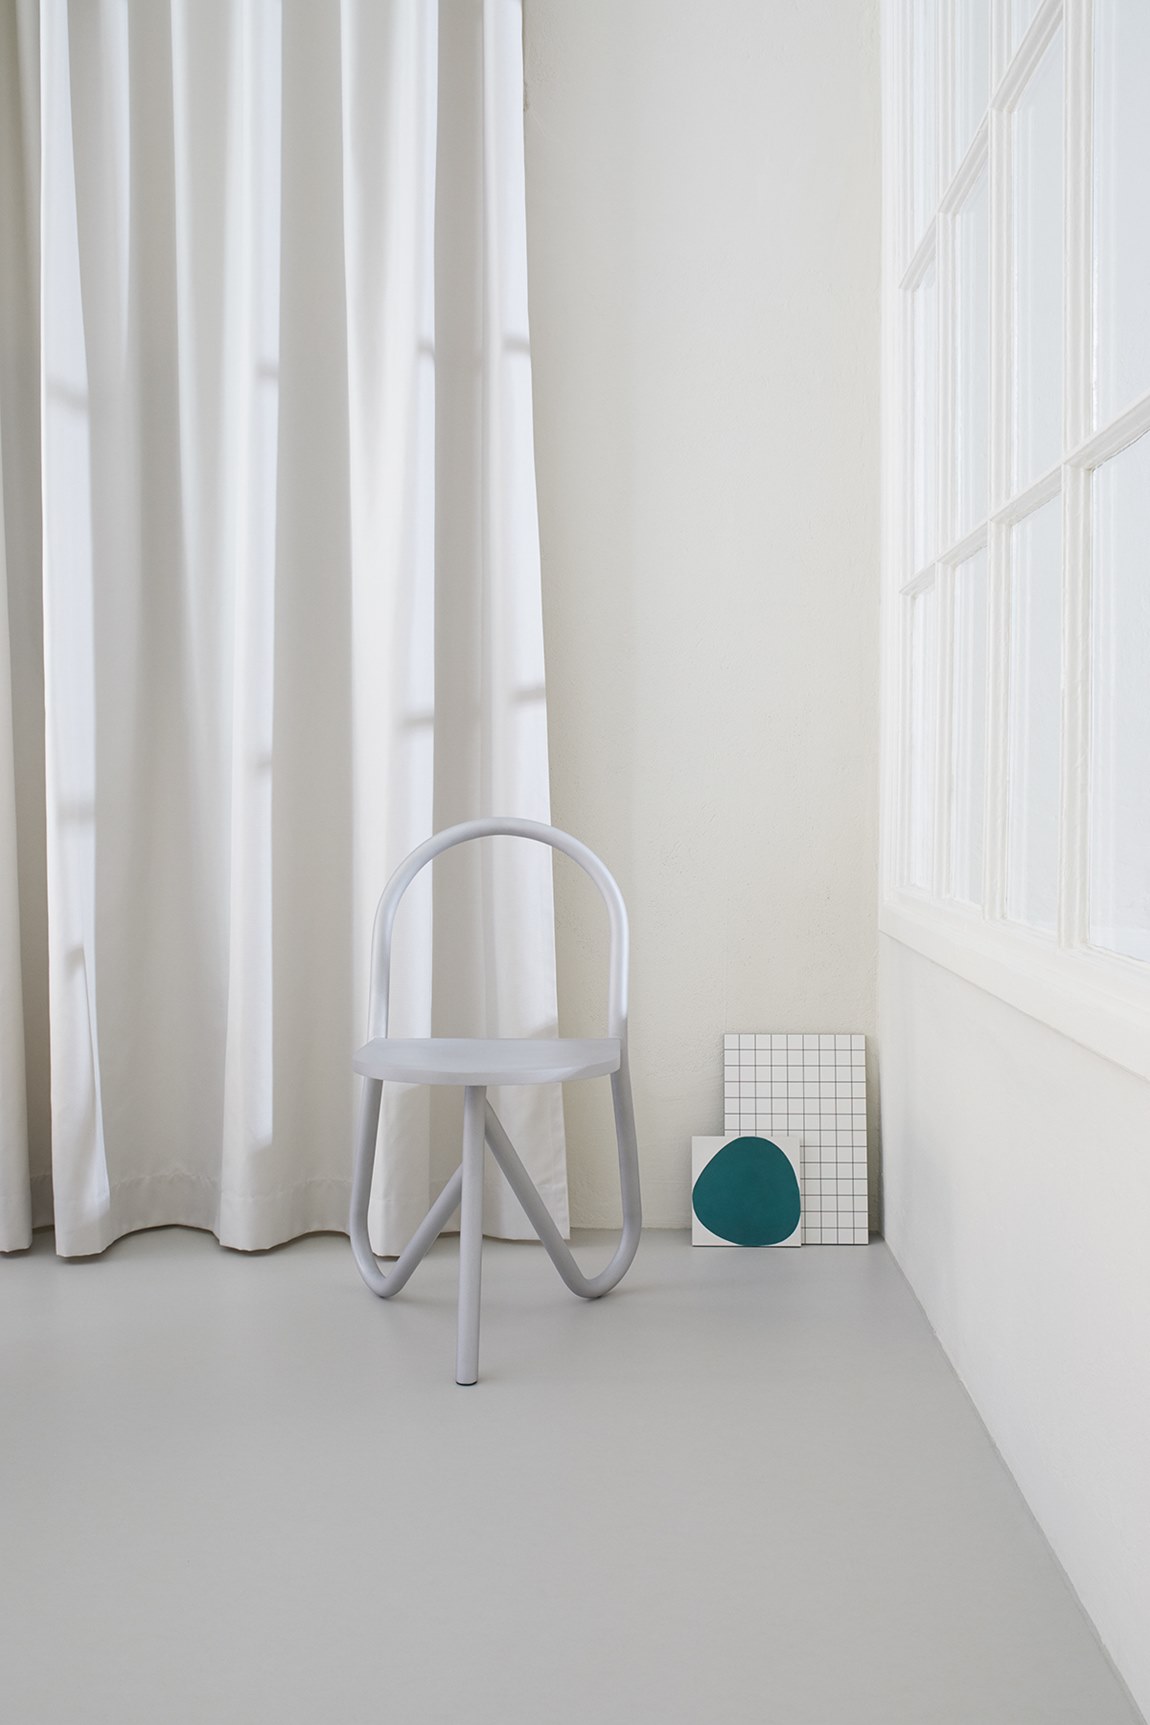 Chair No.19: A Modern and Elegant Furniture Design with a Single Form